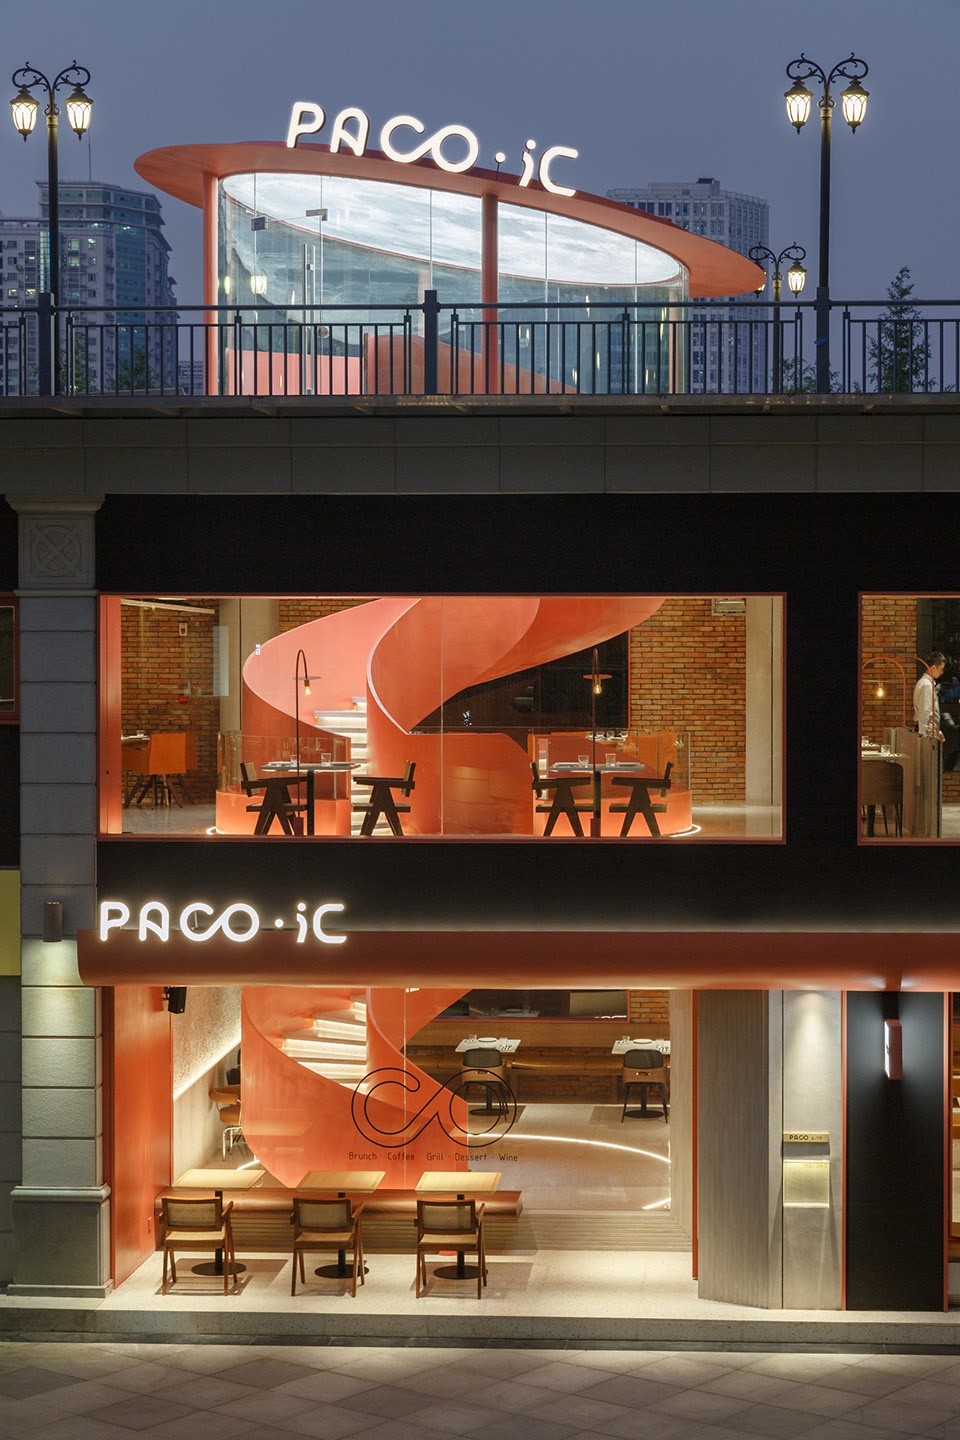 022-paco-restaurant-china-by-pures-design-960x1440.jpg